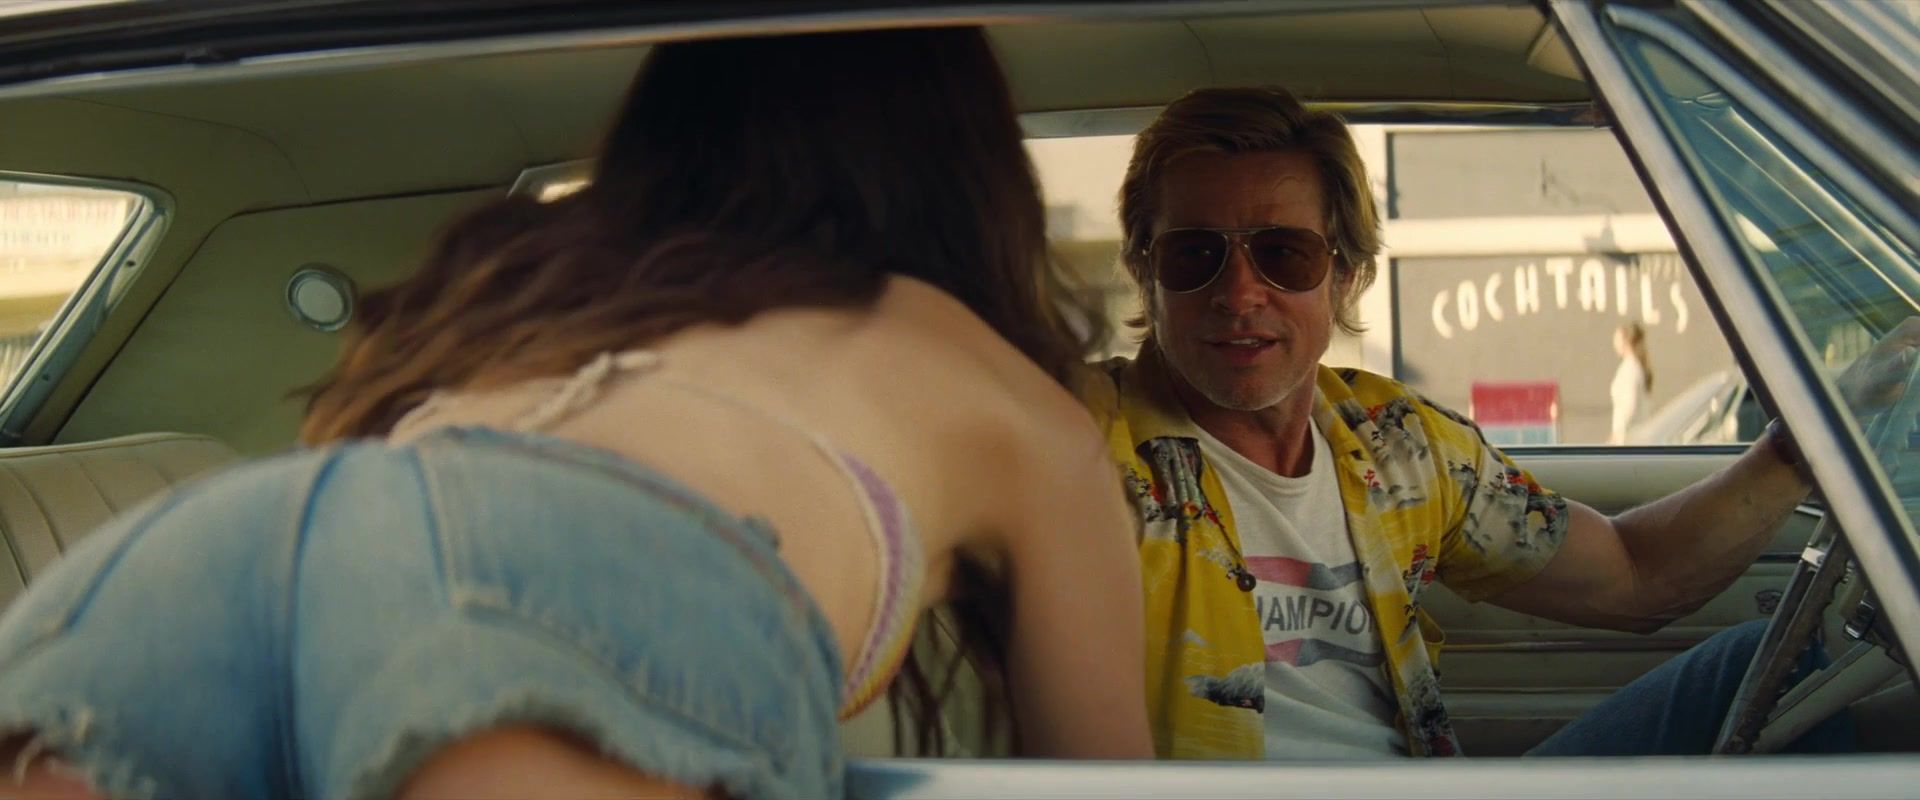 Gay Blondhair Sexy Dakota Fanning, Margaret Qualley naked- Once Upon A Time In Hollywood (2019) Doggy Style Porn - 1